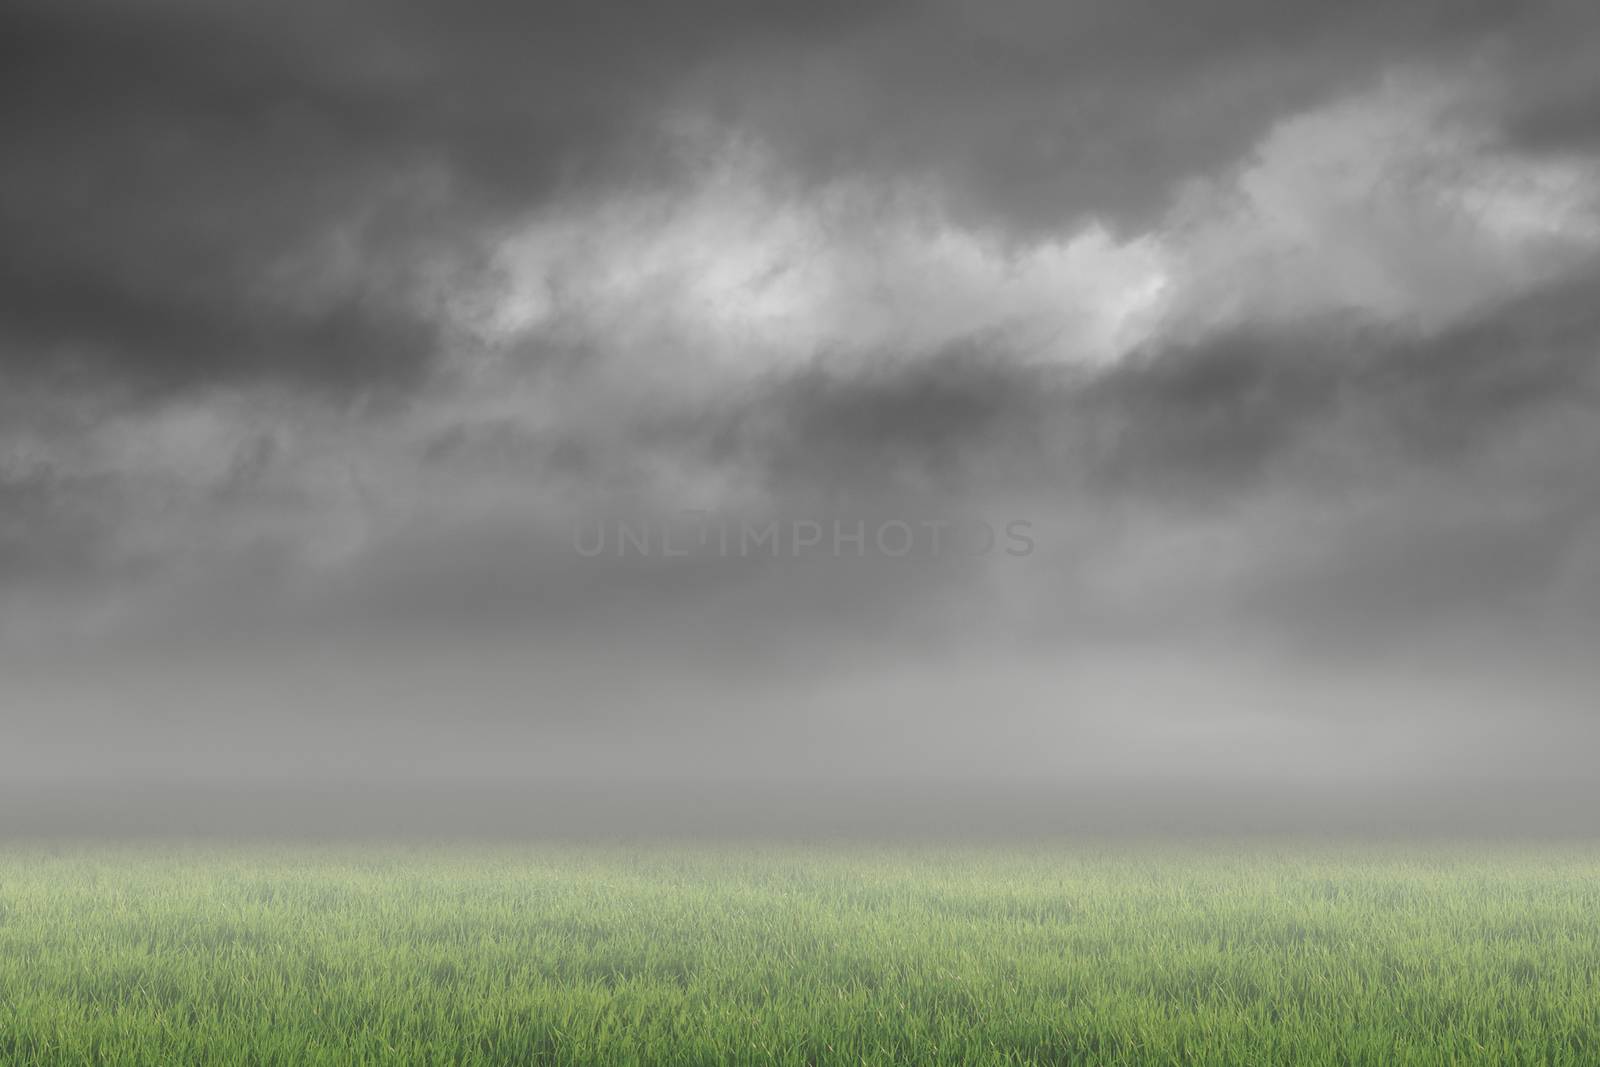 Scenic of clouds on heaven above the ground. Good background for you to put text or people on the ground.